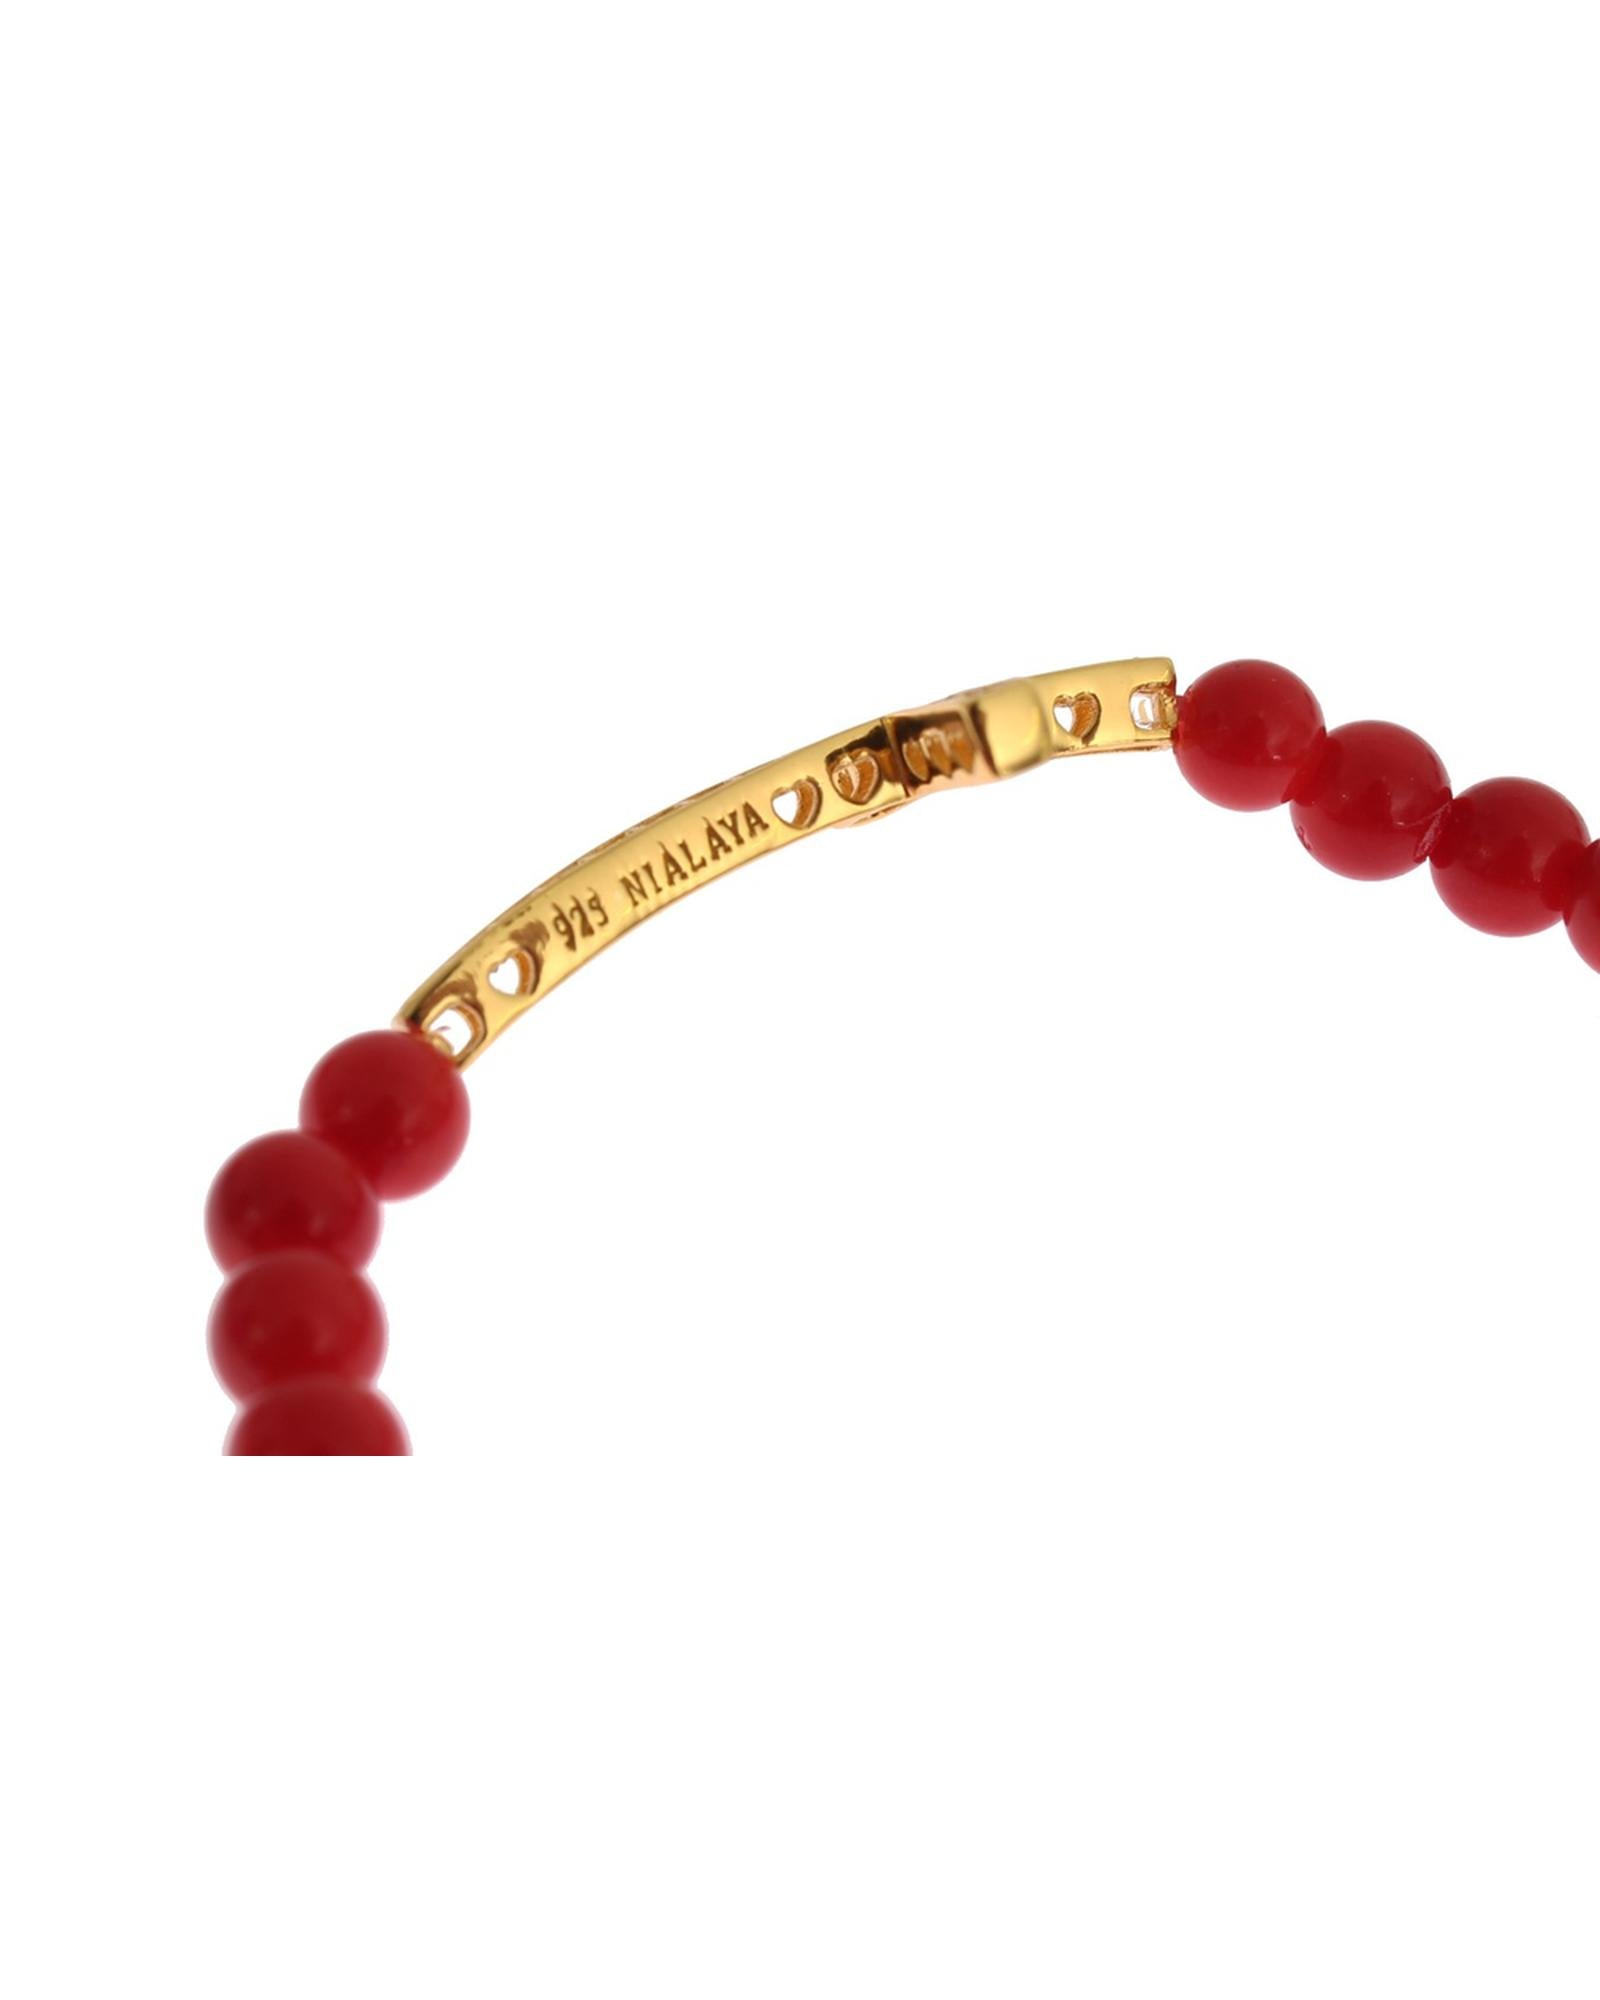 Authentic  Gold Plated Silver Bracelet with Red Coral Beads and CZ Diamond Cross M Women